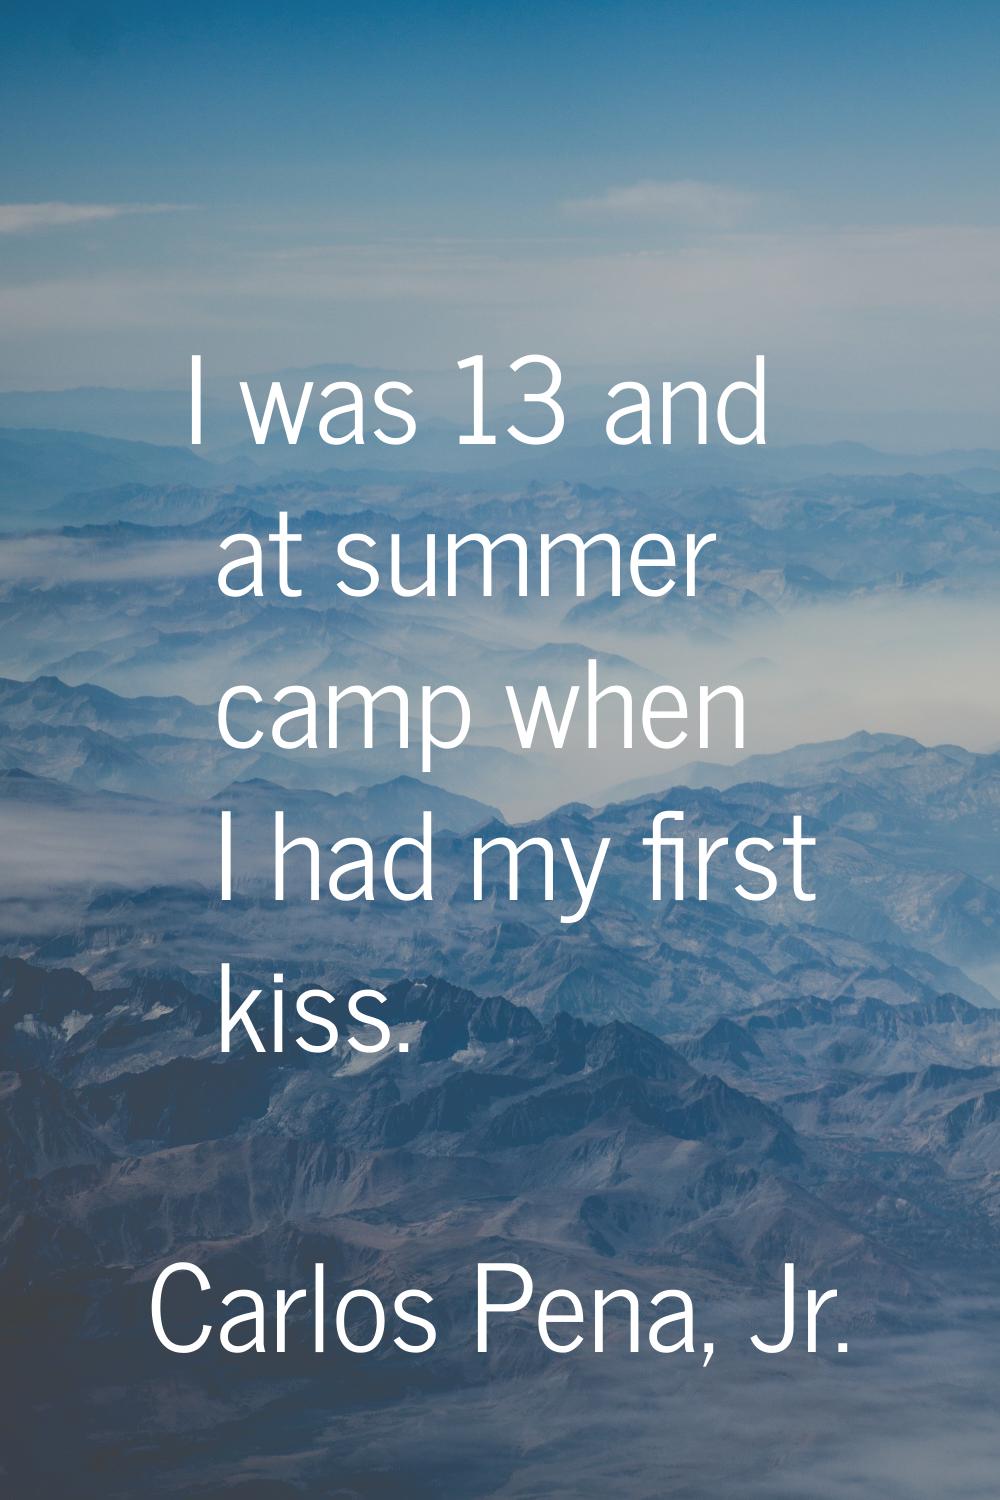 I was 13 and at summer camp when I had my first kiss.